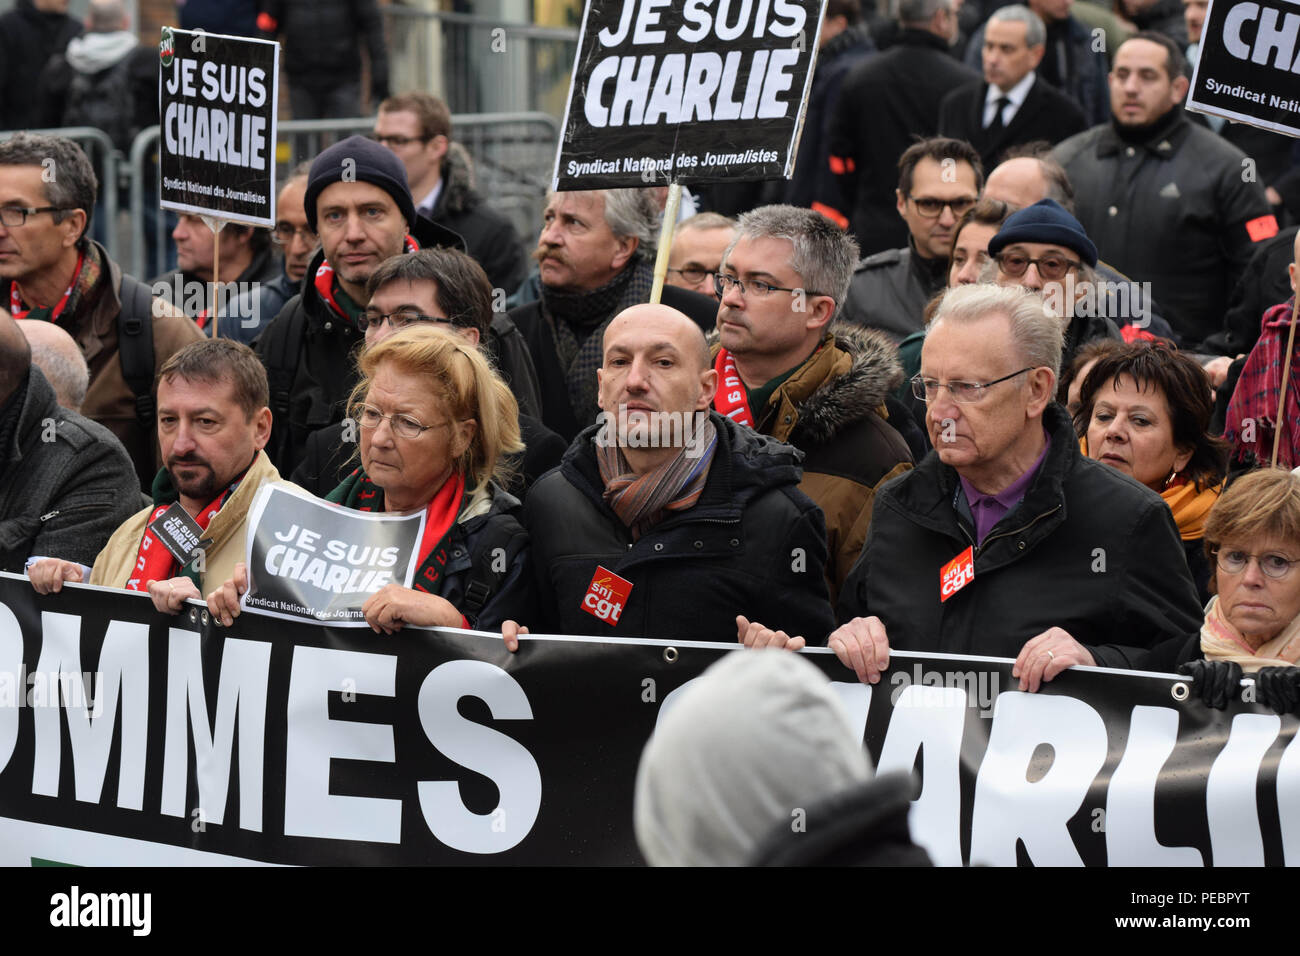 January 11, 2015 - Paris, France:  French journalists take part in a unity march following the deadly Paris attacks. Four million people demonstrated across the country in a 'Marche Republicaine' (Republican March) celebrating the nation's unity in face of terrorist threats. Thousands of people had banners or cartoons referring to Charlie Hebdo, the satirical magazine whose office was targeted by Islamist gunmen earlier in the week. La grande marche republicaine en hommage aux victimes de l'attentat contre Charlie Hebdo a rassemble pres de 2 millions de personnes dans les rues de Paris. Il s'a Stock Photo